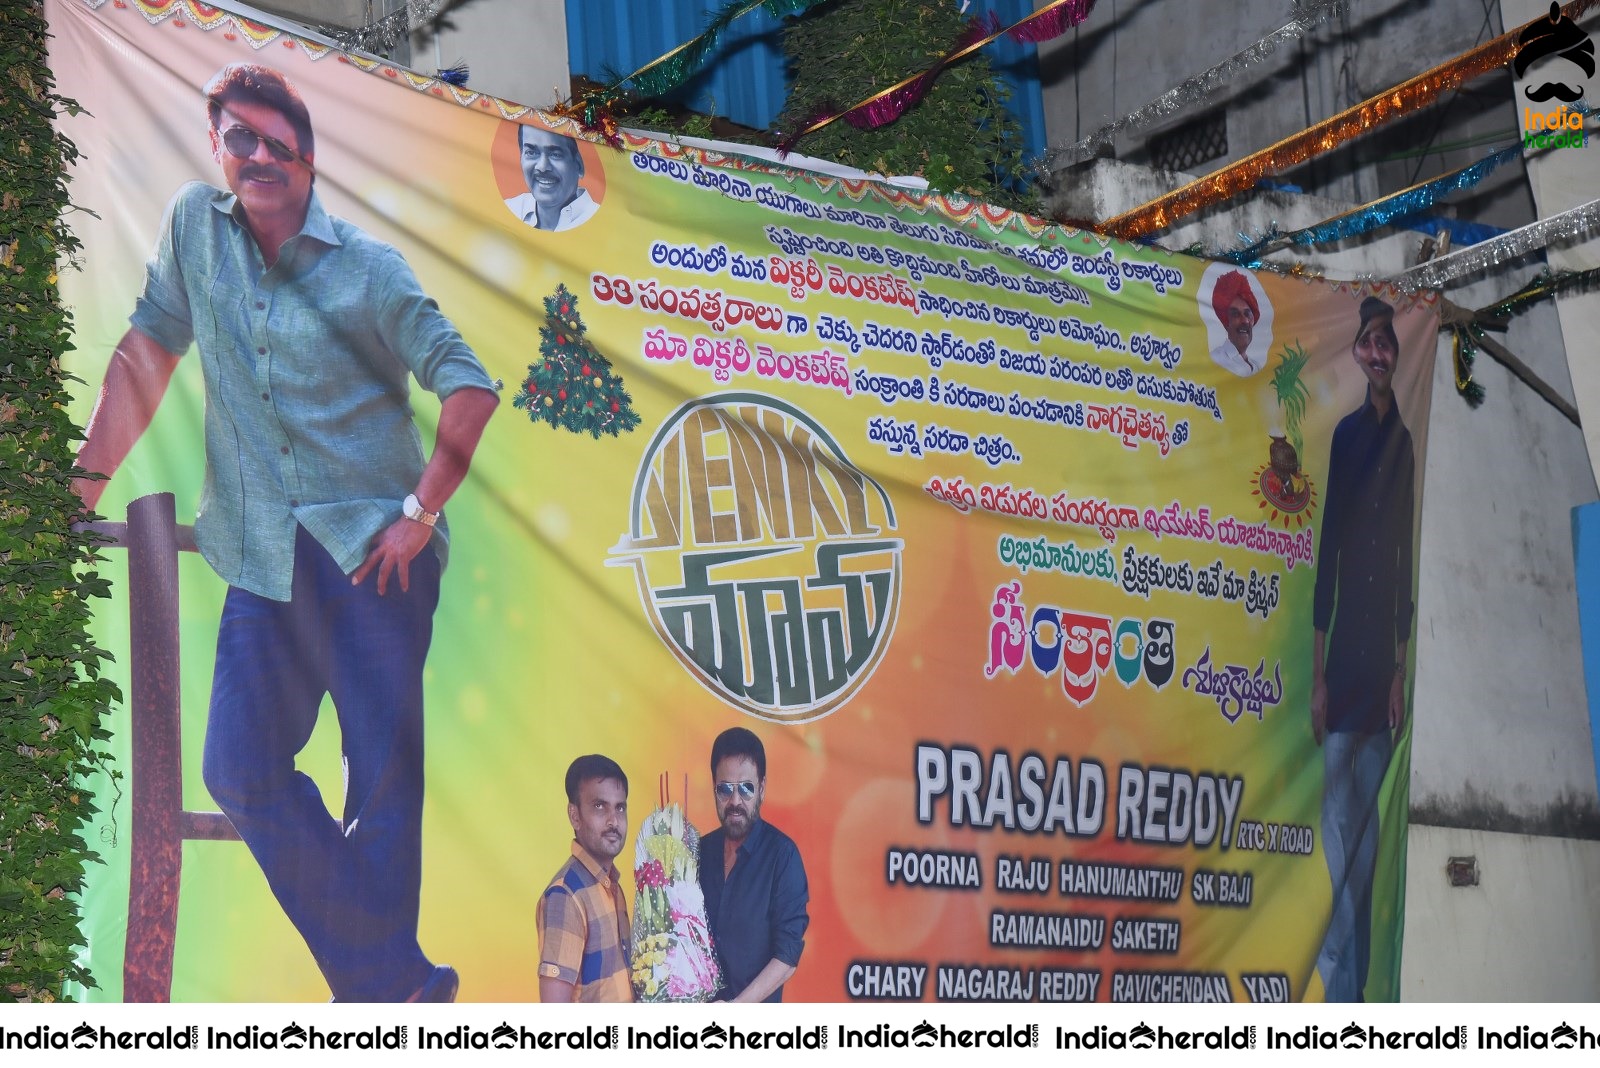 Huge Hoardings and Crackers Bursted for welcoming Venky Mama Team to Devi Theater Set 2